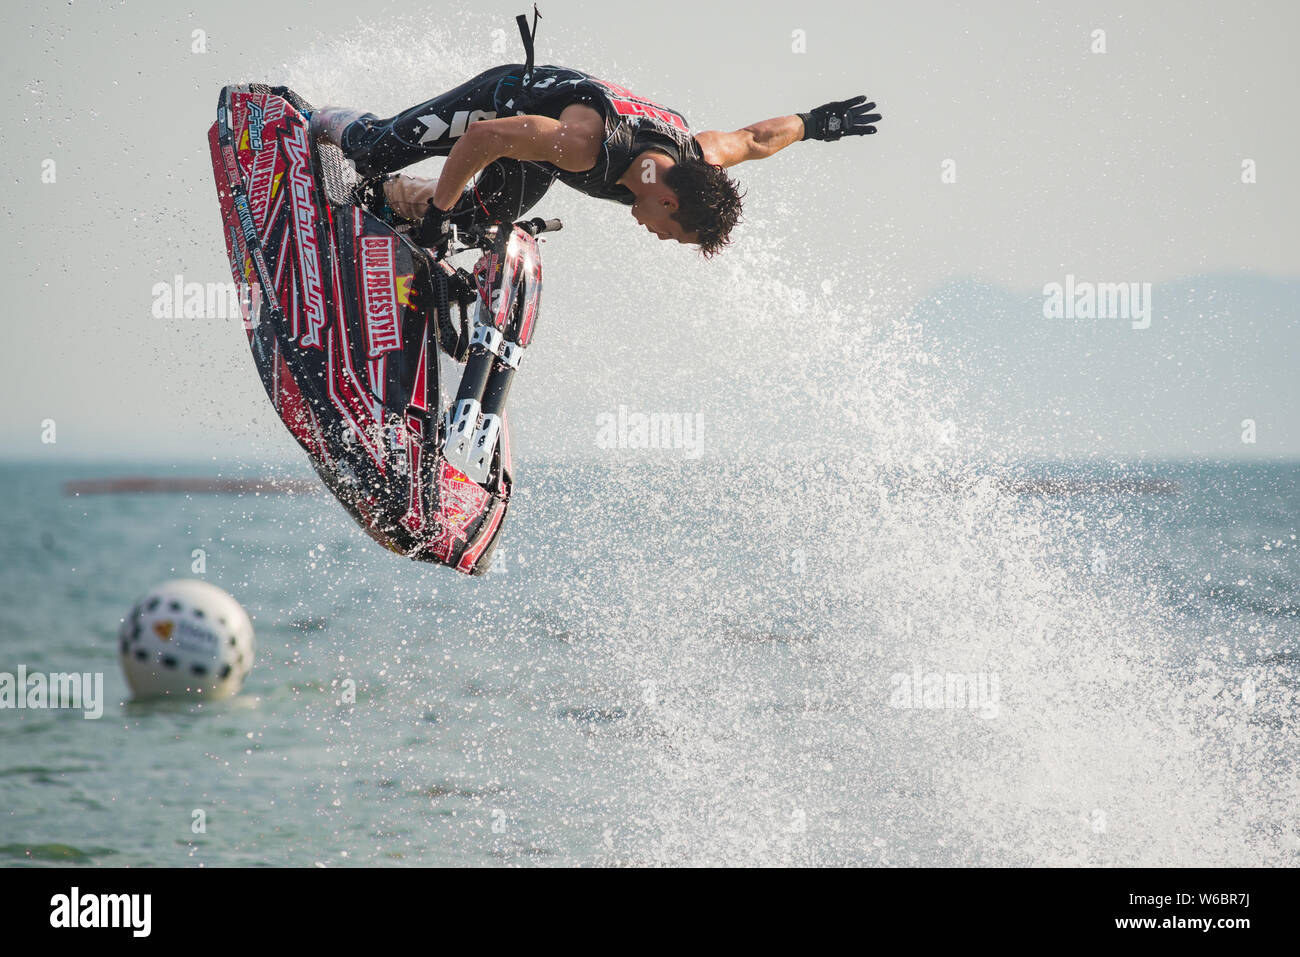 Pattaya, Thailand - December 9, 2017: Taiji Yamamoto from Japan during his performance at the freestyle competition during the International Jet Ski W Stock Photo